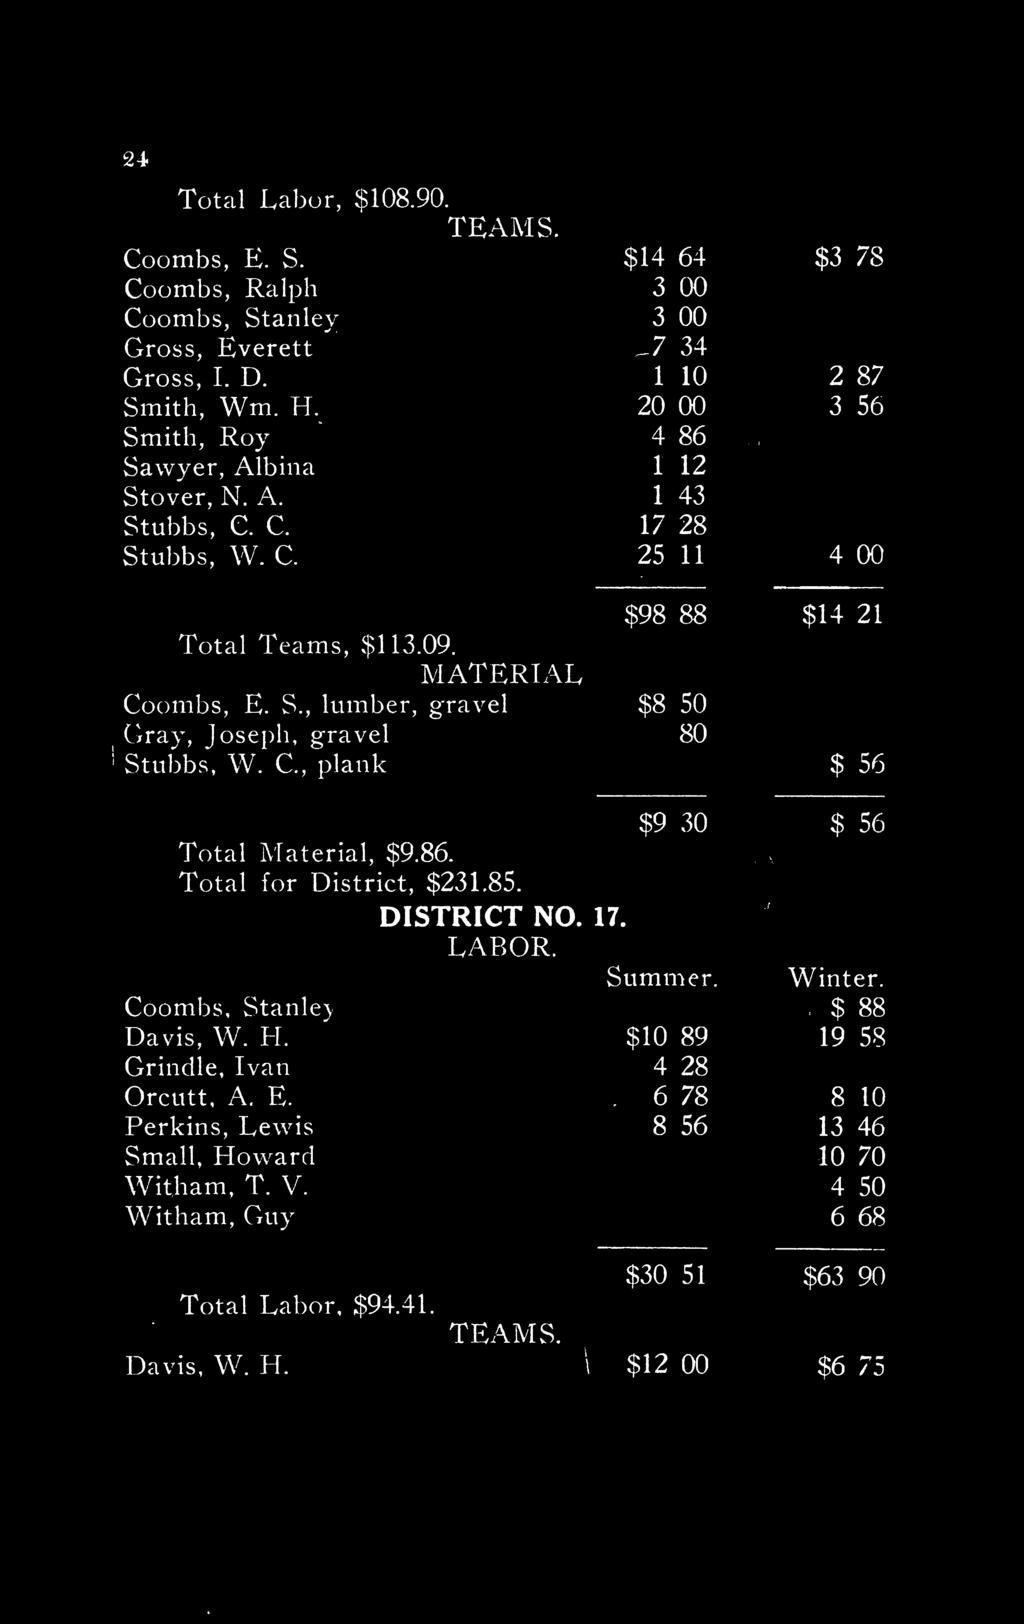 Total for District, $231.85. V» i. DISTRICT NO. 17. J LABOR. Summer. Winter. Coombs, Stanley Davis, W. H. Grindle, Ivan Orcutt, A. E. Perkins, Lewis Small, Howard Wit,ham, T. V. Witham, Guy $10 89 4 28.